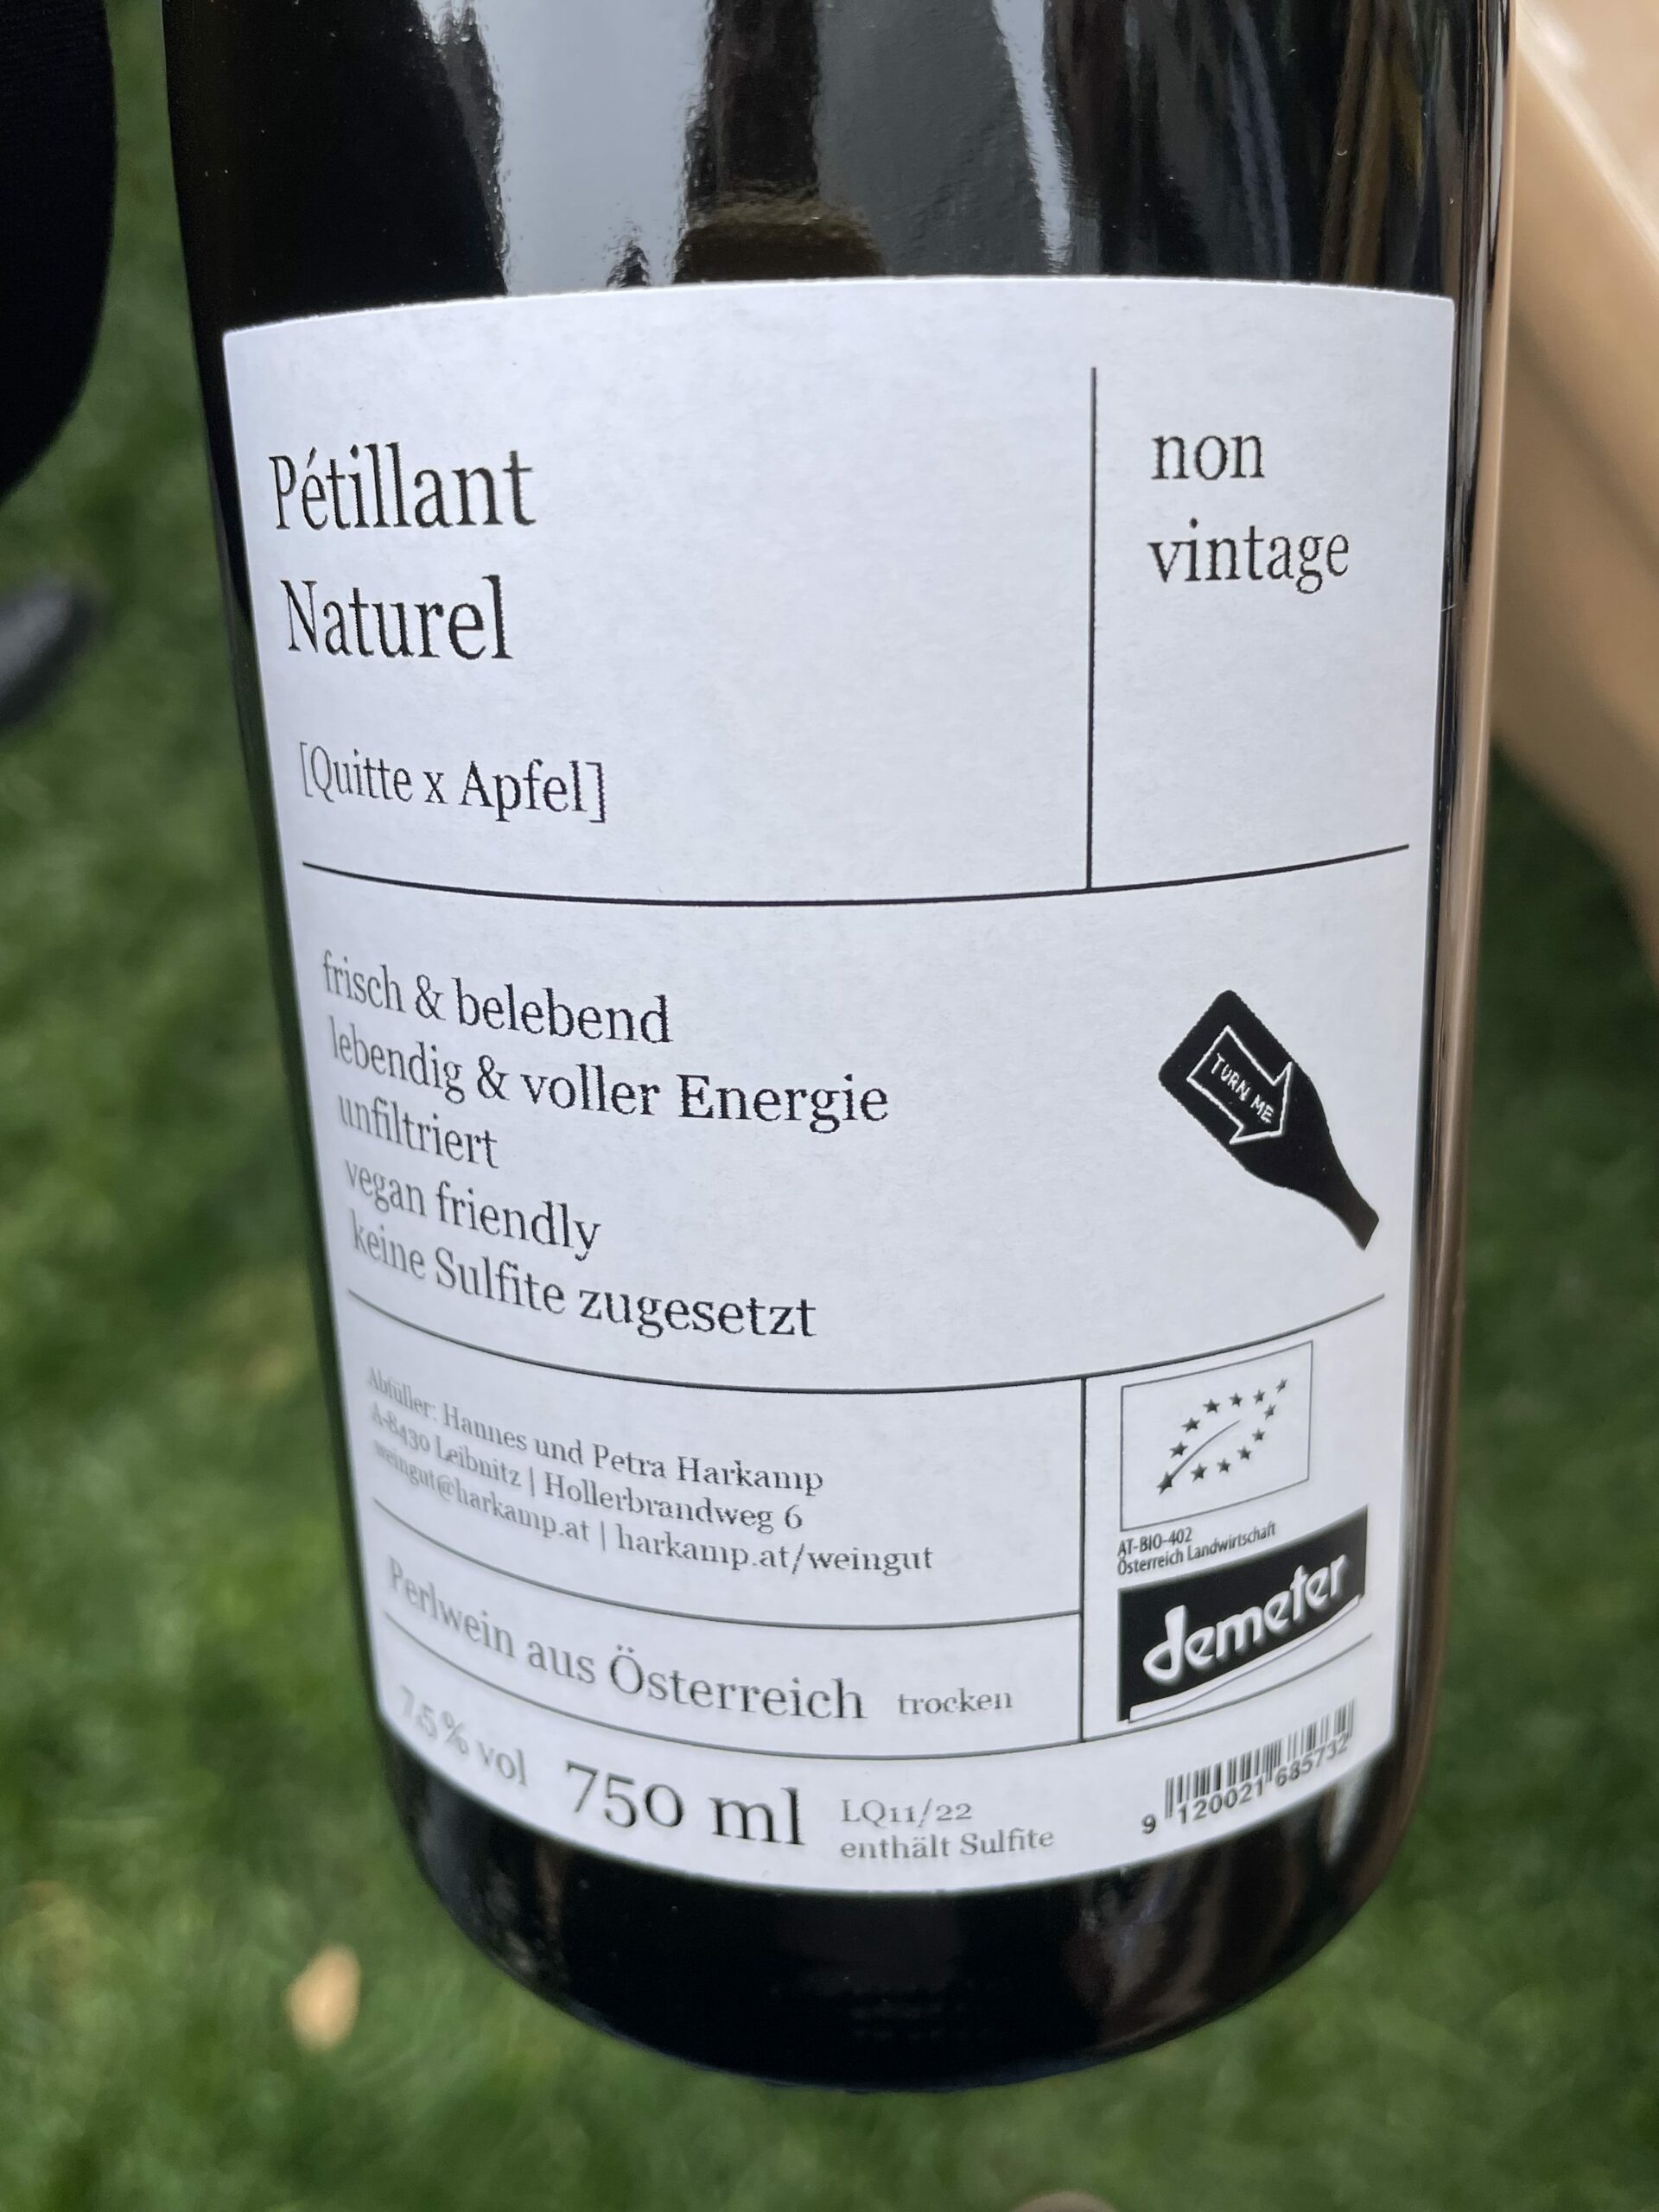 Against a grass background, a wine bottle with a large white label reads Petillant Naturel Quitte x Apfel non vintage. Includes logo for EU organic wine and demeter biodynamic certification.